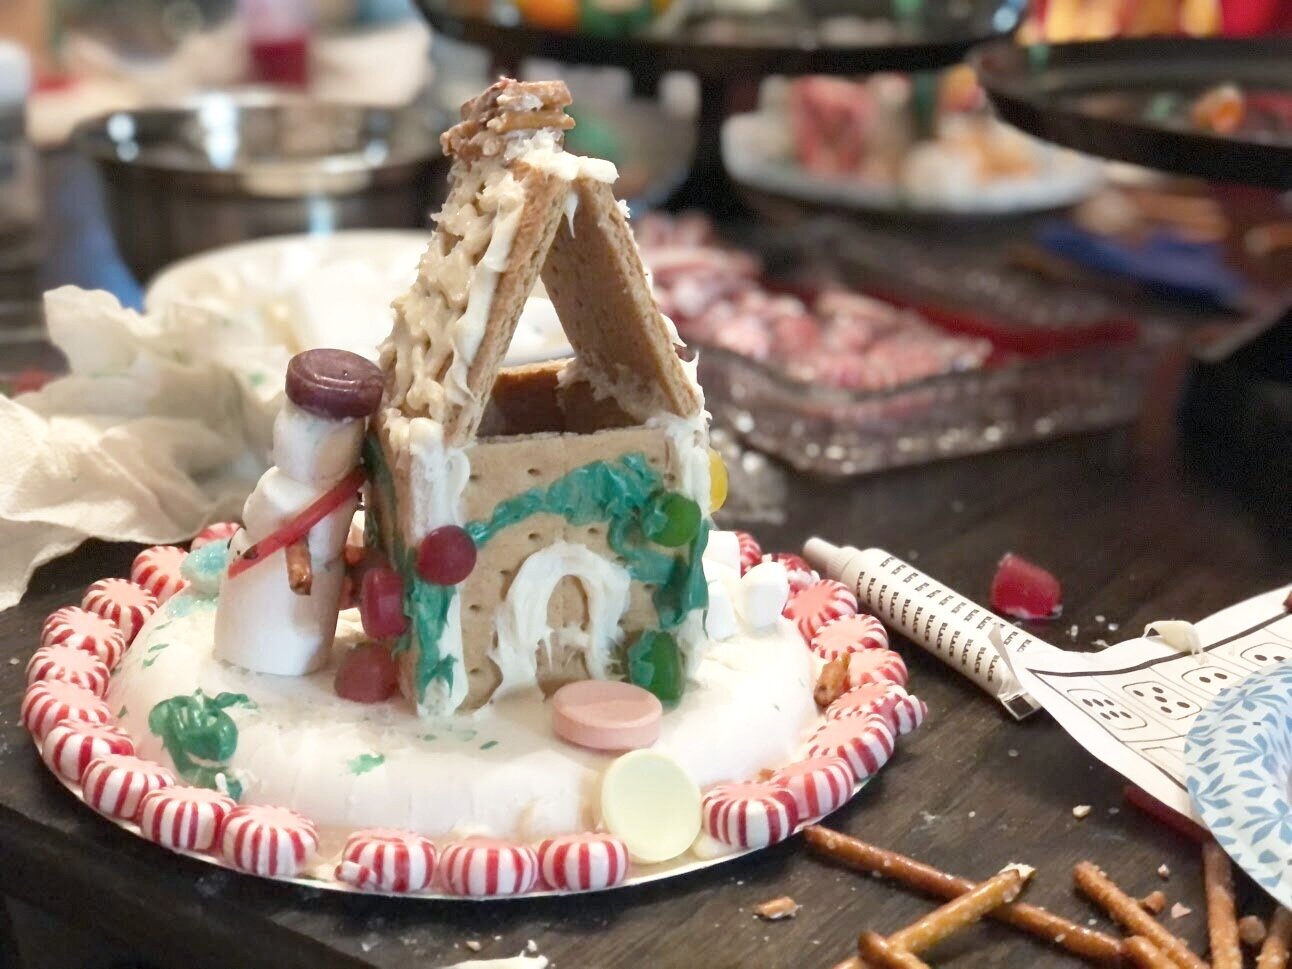 Kid's gingerbread house decorating party